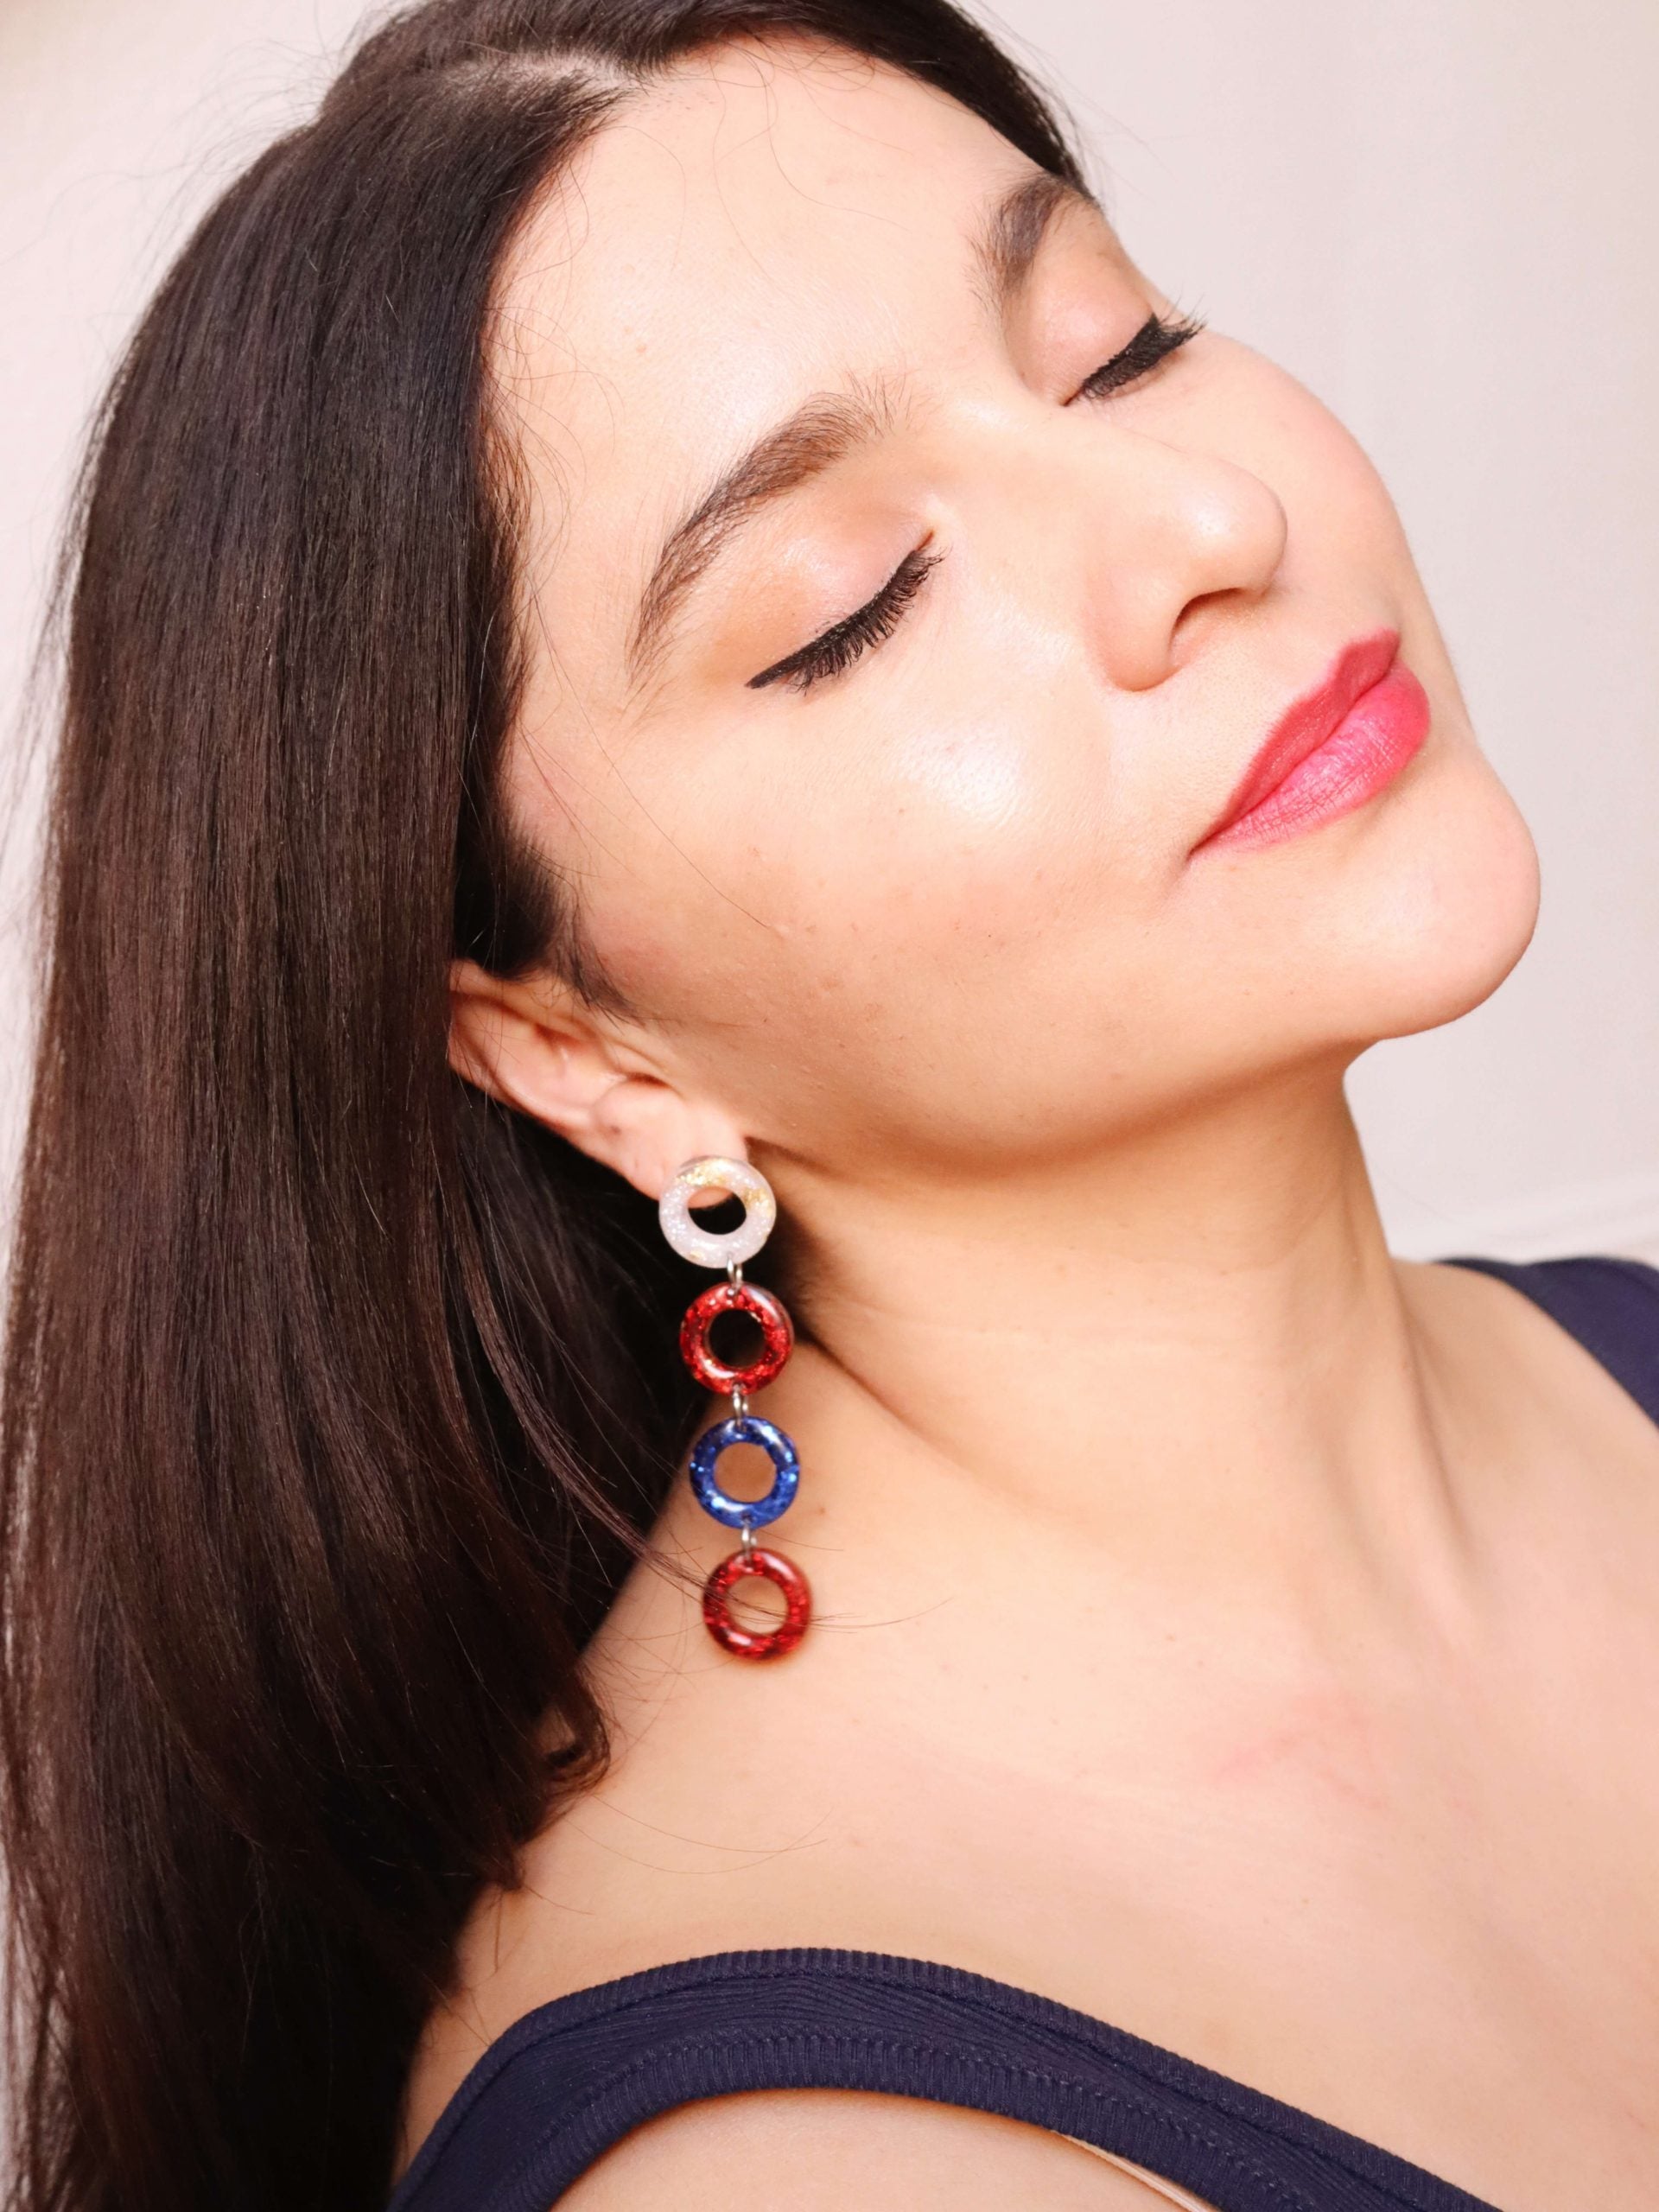 long-patriotic-chain-earrings---hypoallergenic-studs---red-white-and-blue-earrings---kaleidoscopes-and-polka-dots